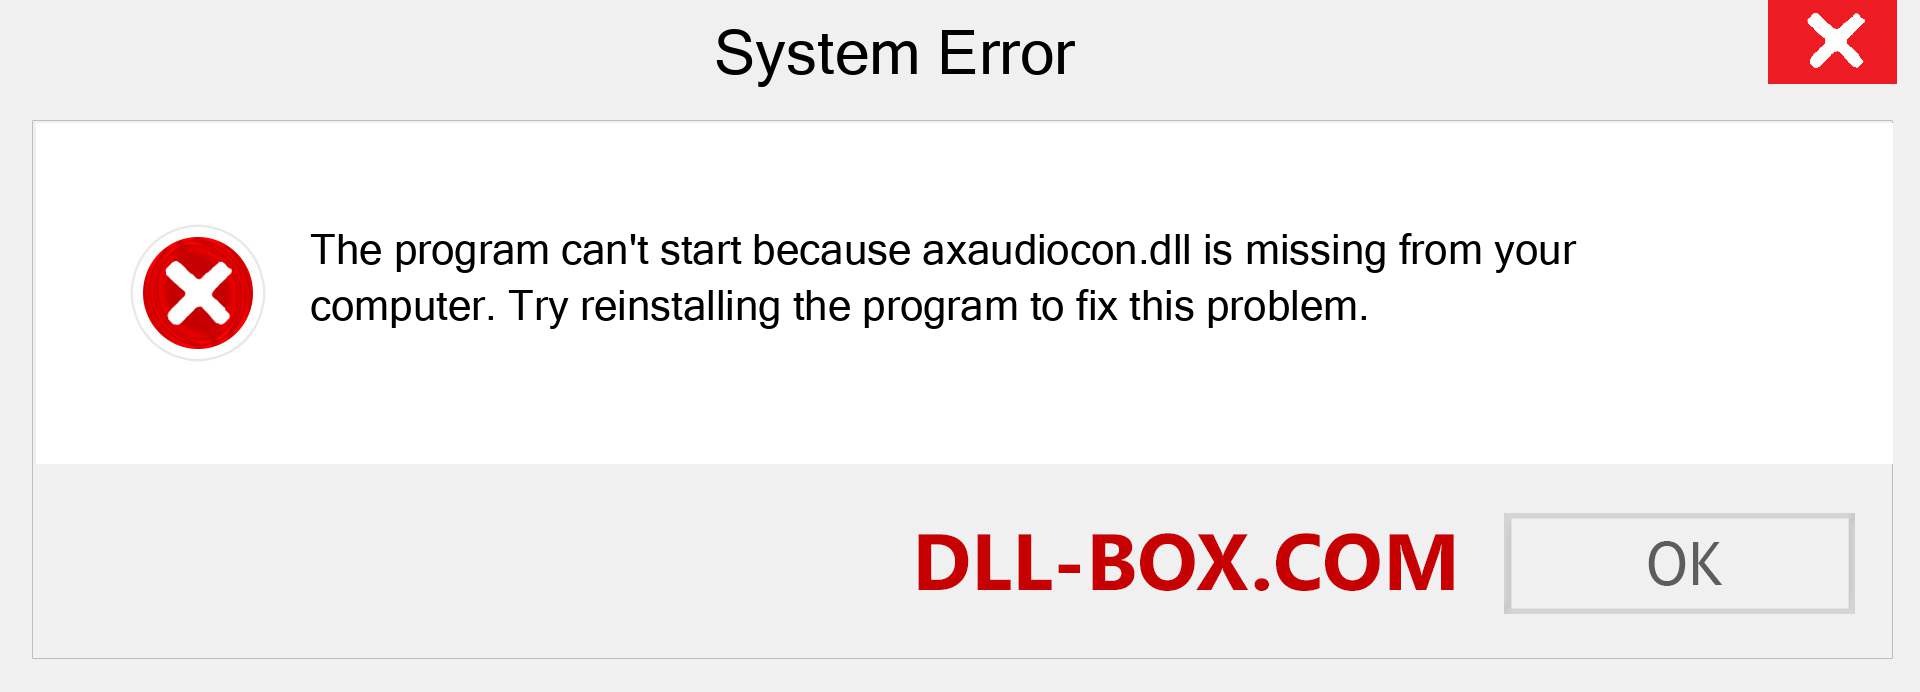  axaudiocon.dll file is missing?. Download for Windows 7, 8, 10 - Fix  axaudiocon dll Missing Error on Windows, photos, images